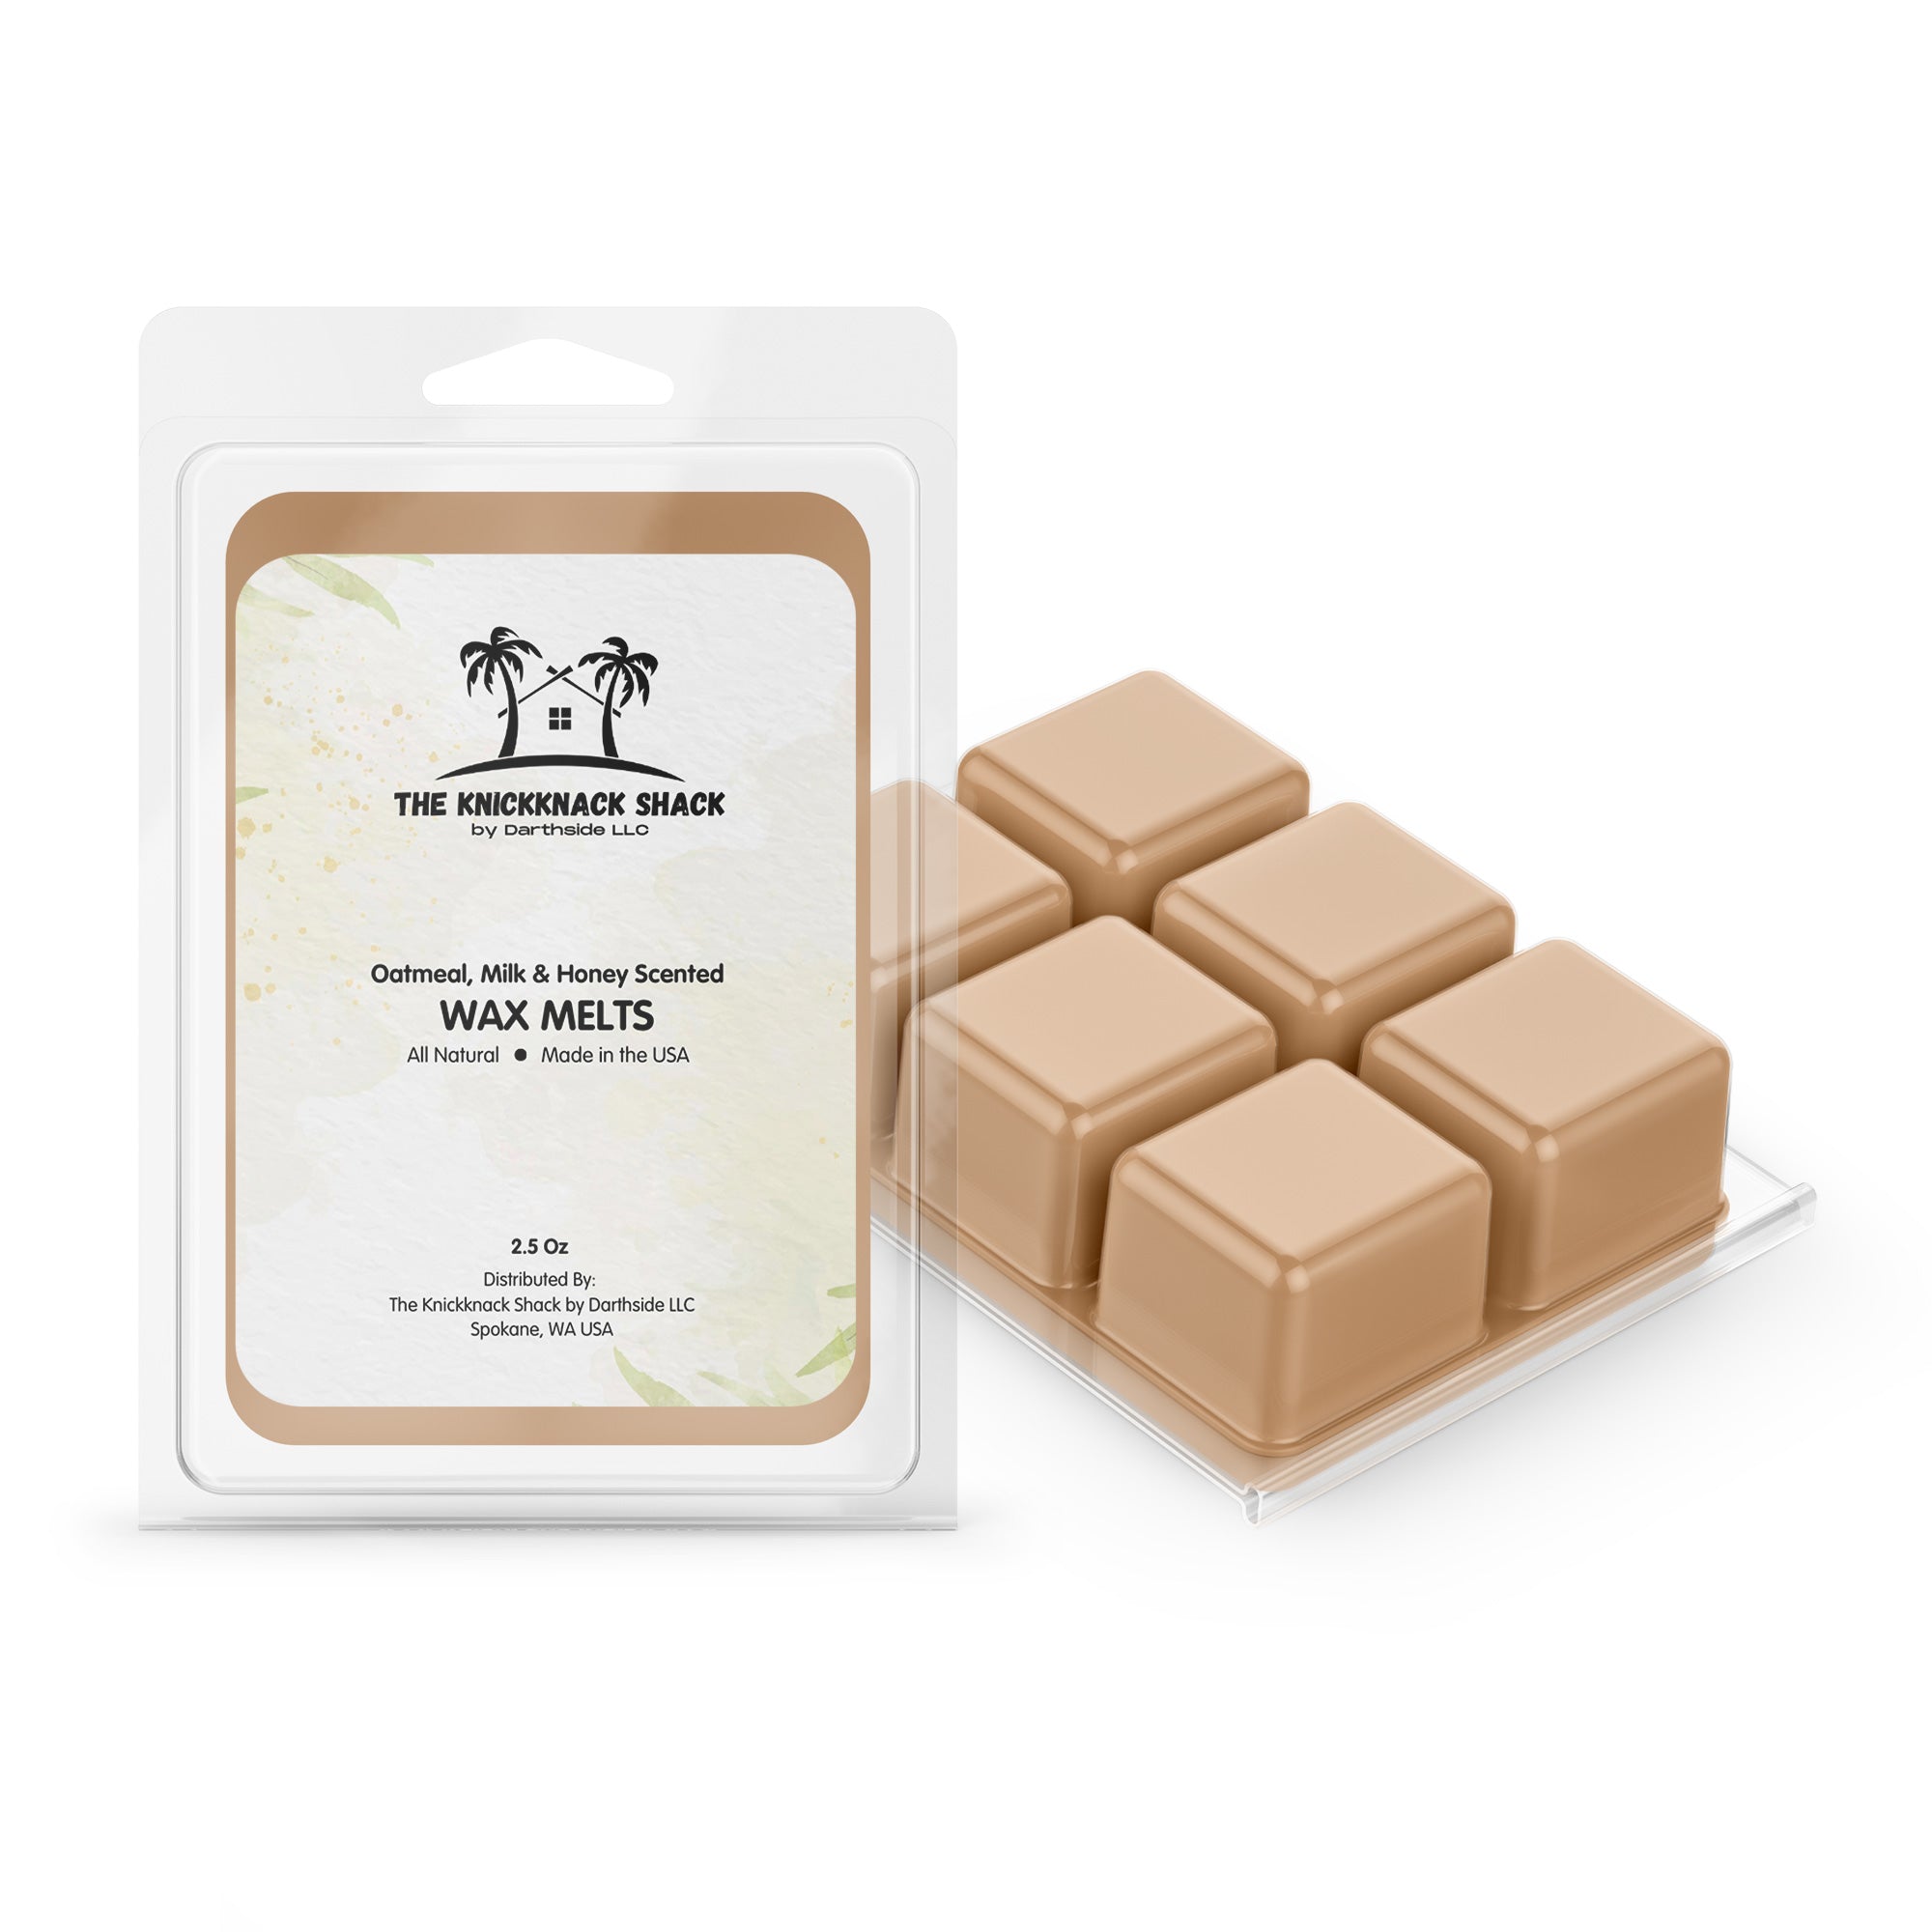 Oatmeal and Honey Scented Wax Melts